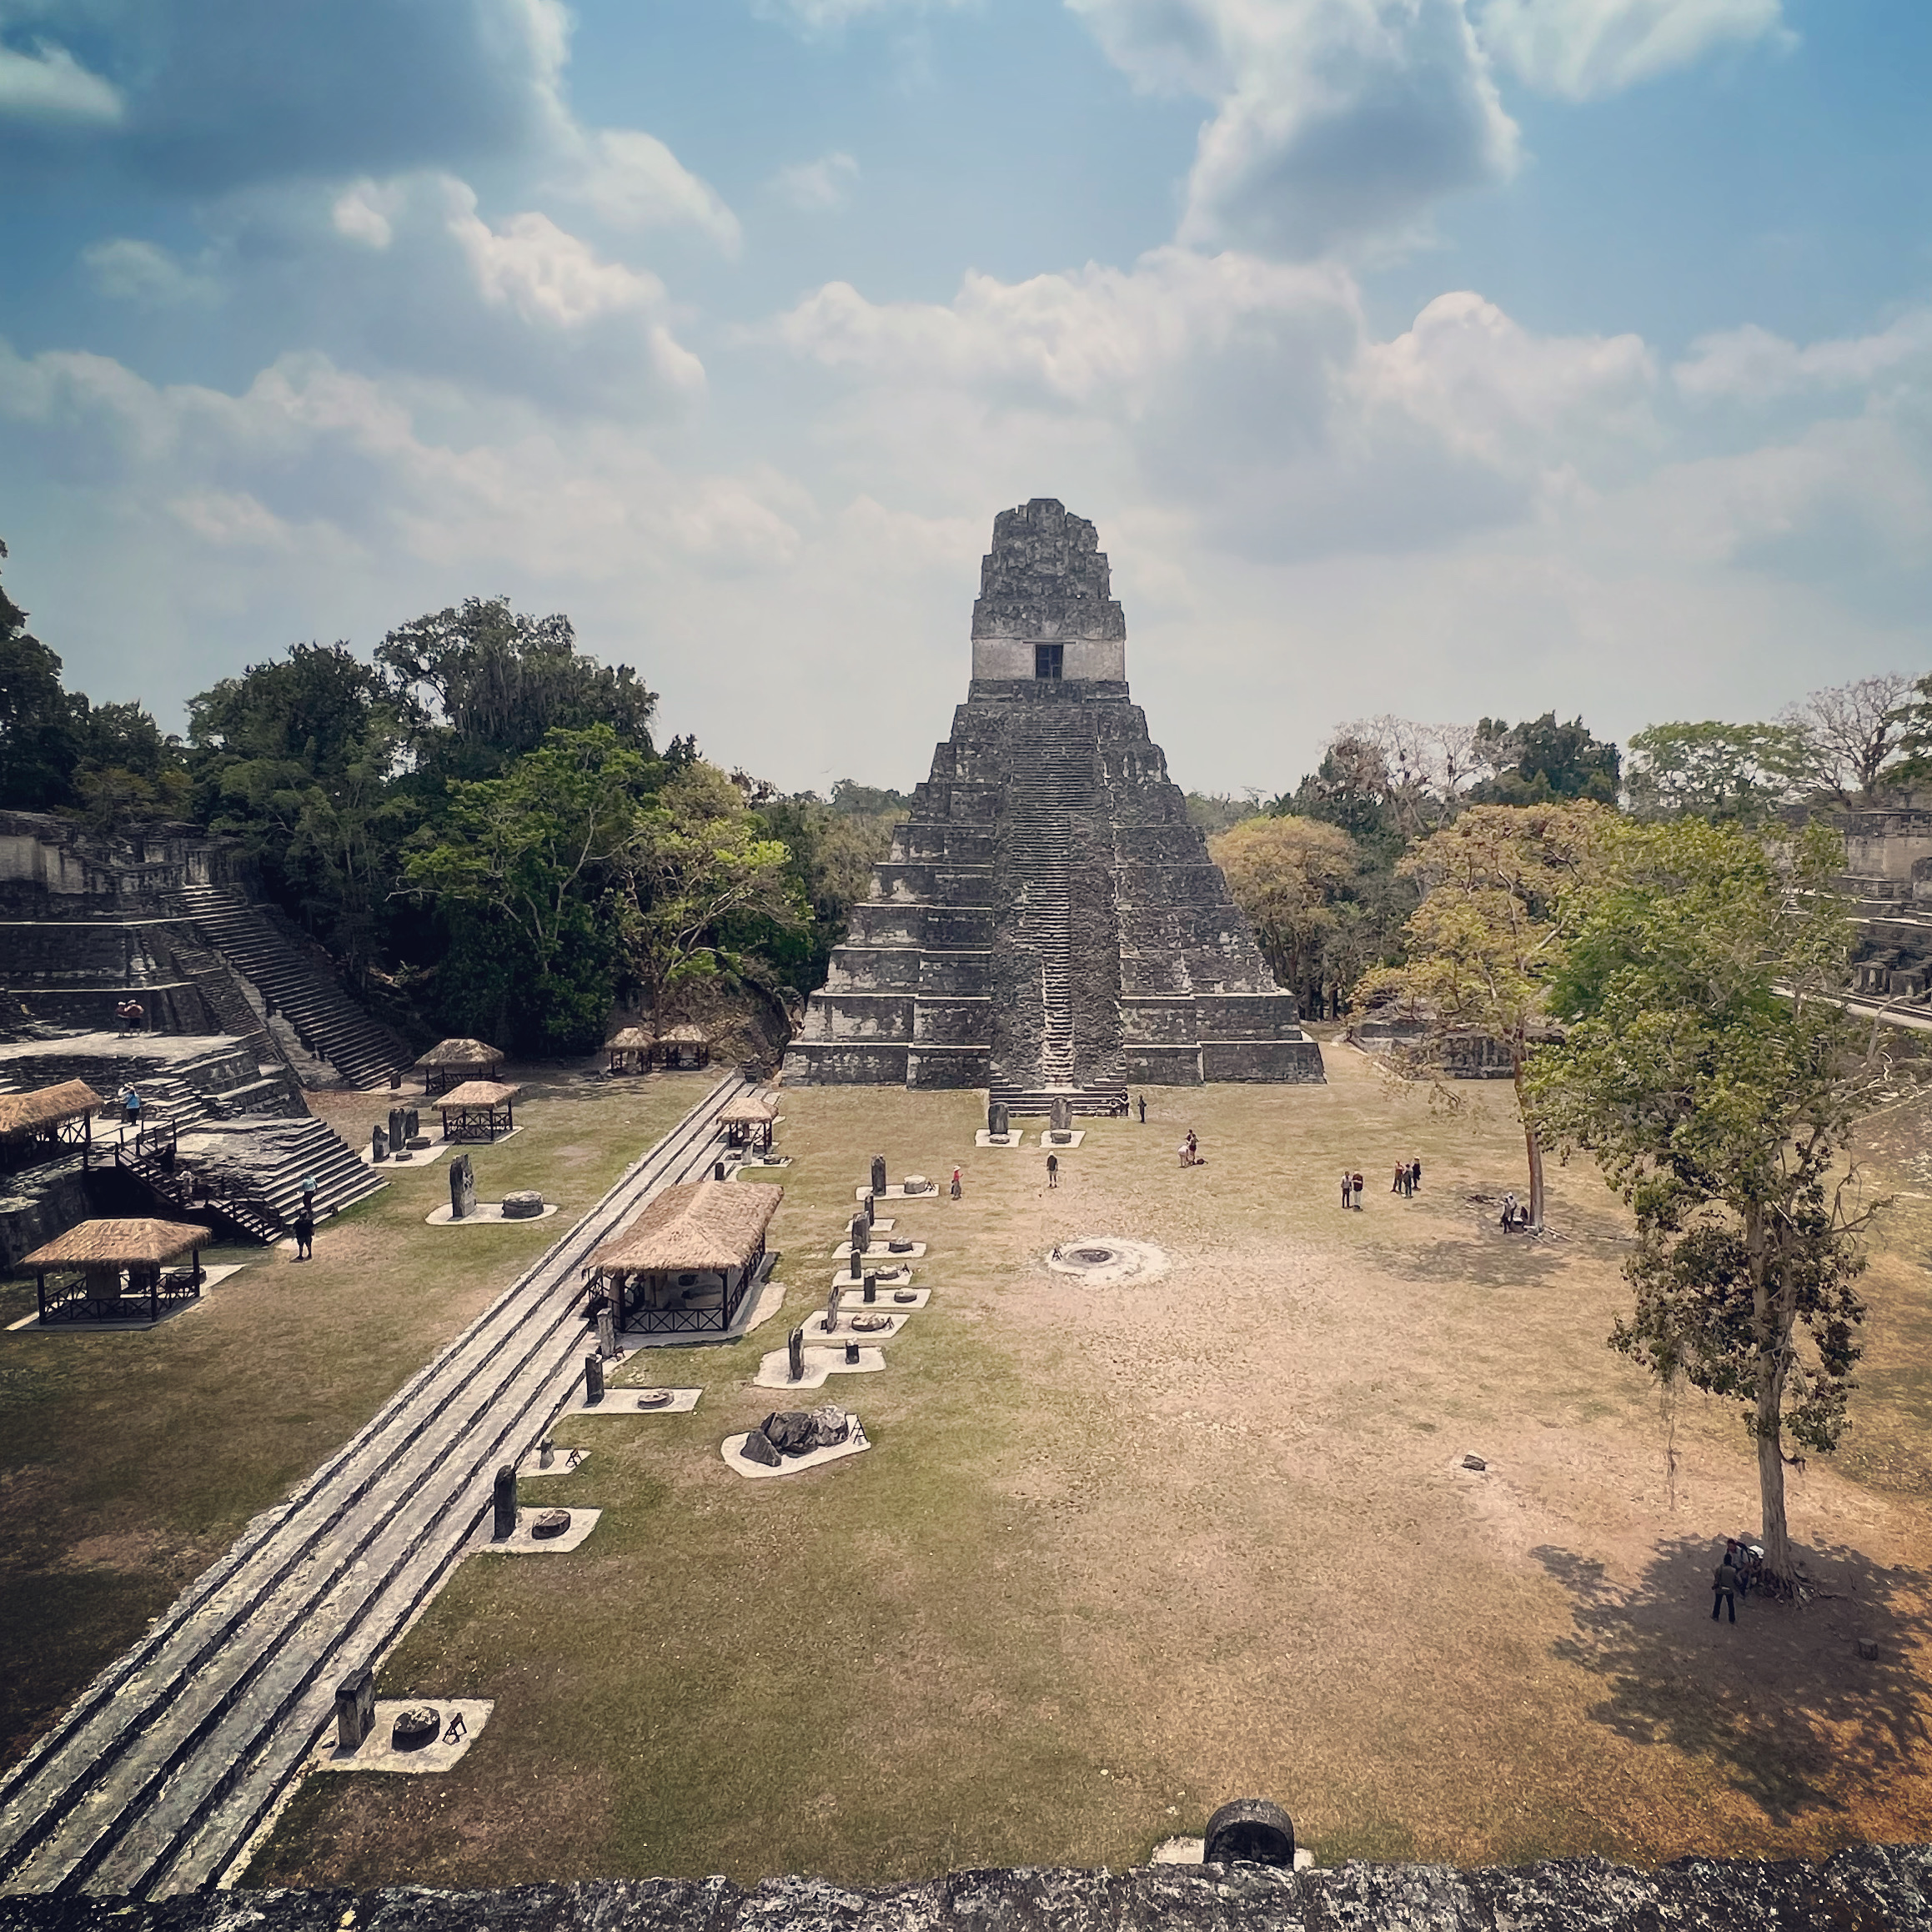 Tikal National Park is in Guatemala, but accessible by land from Belize, and one of the top things to do in Belize.